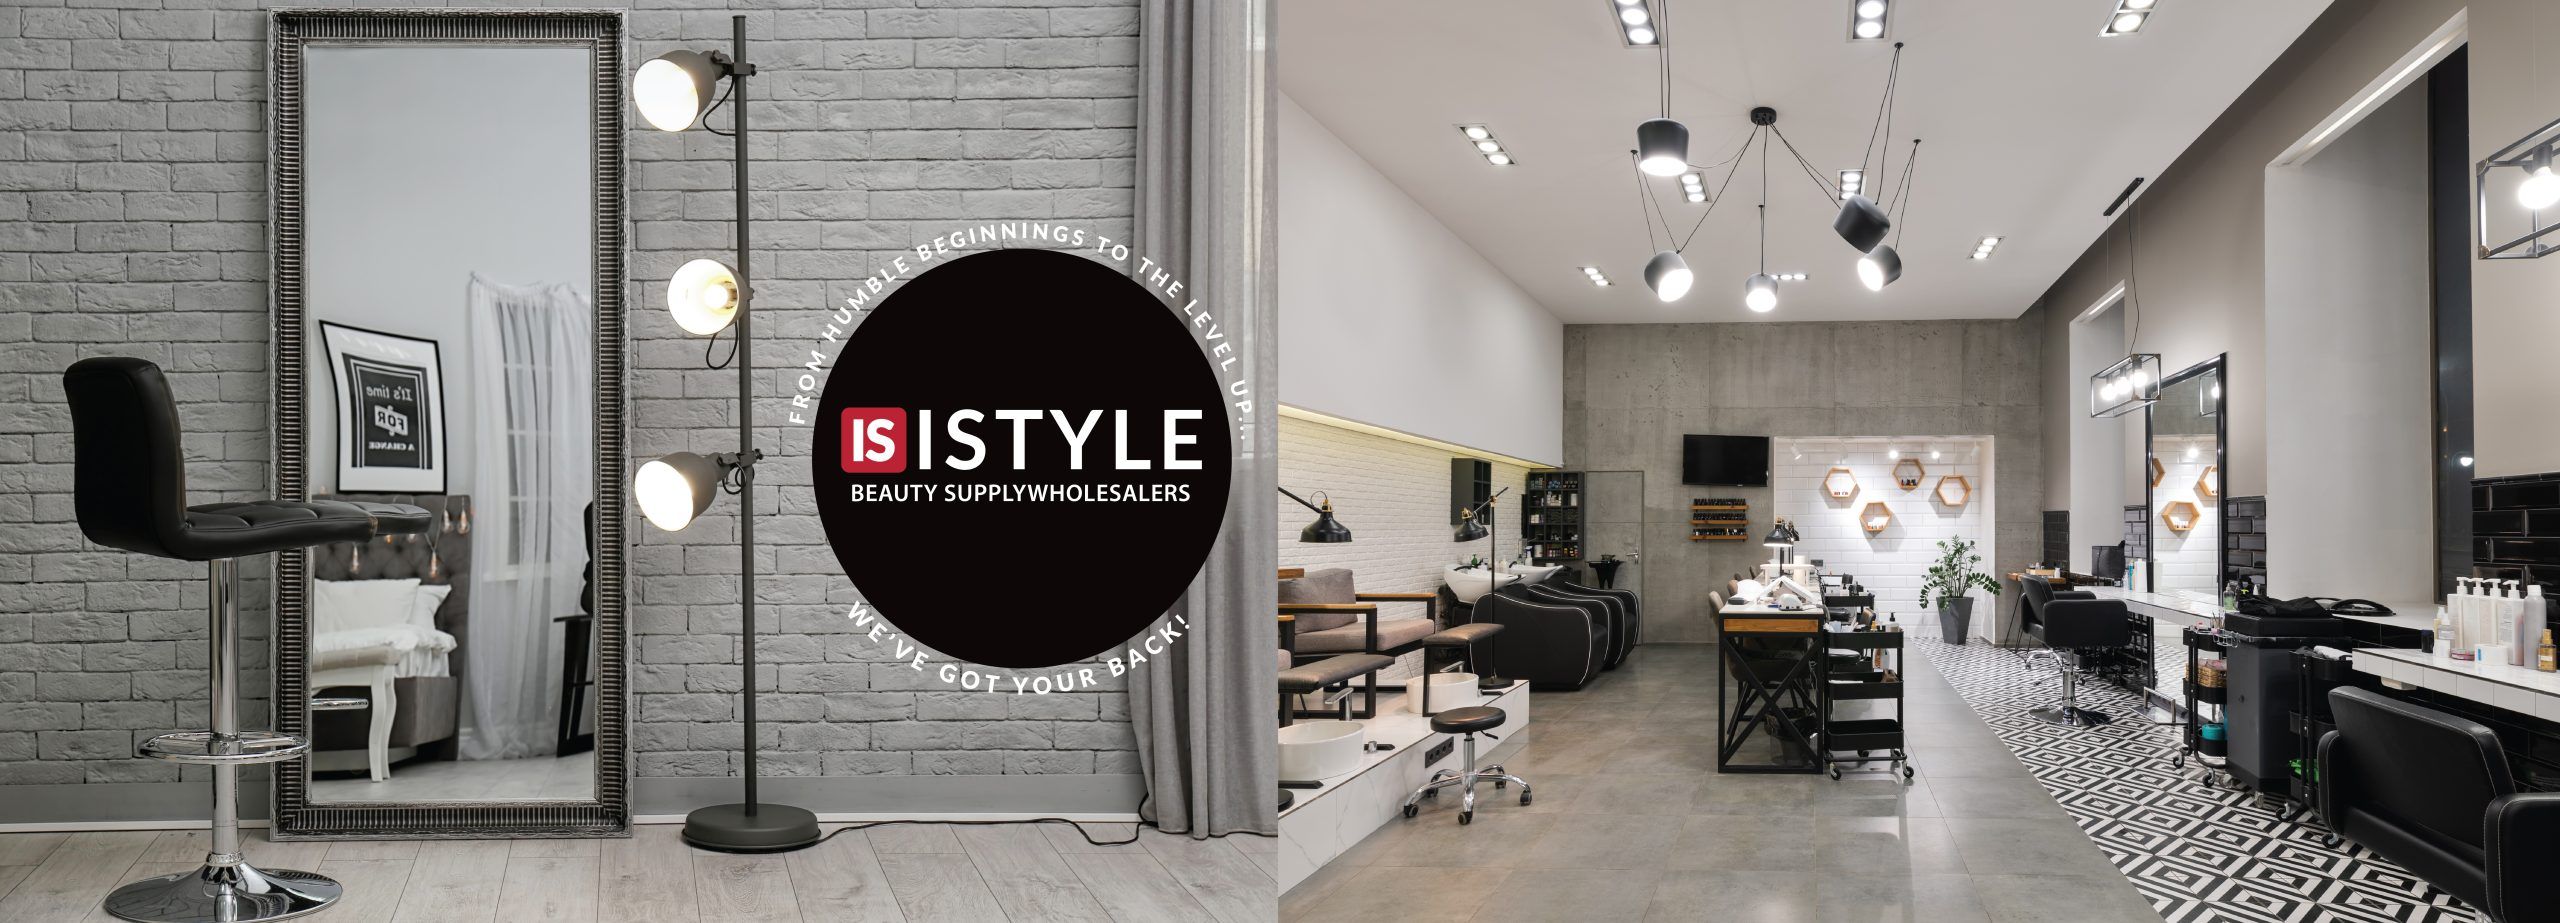 istyle professional